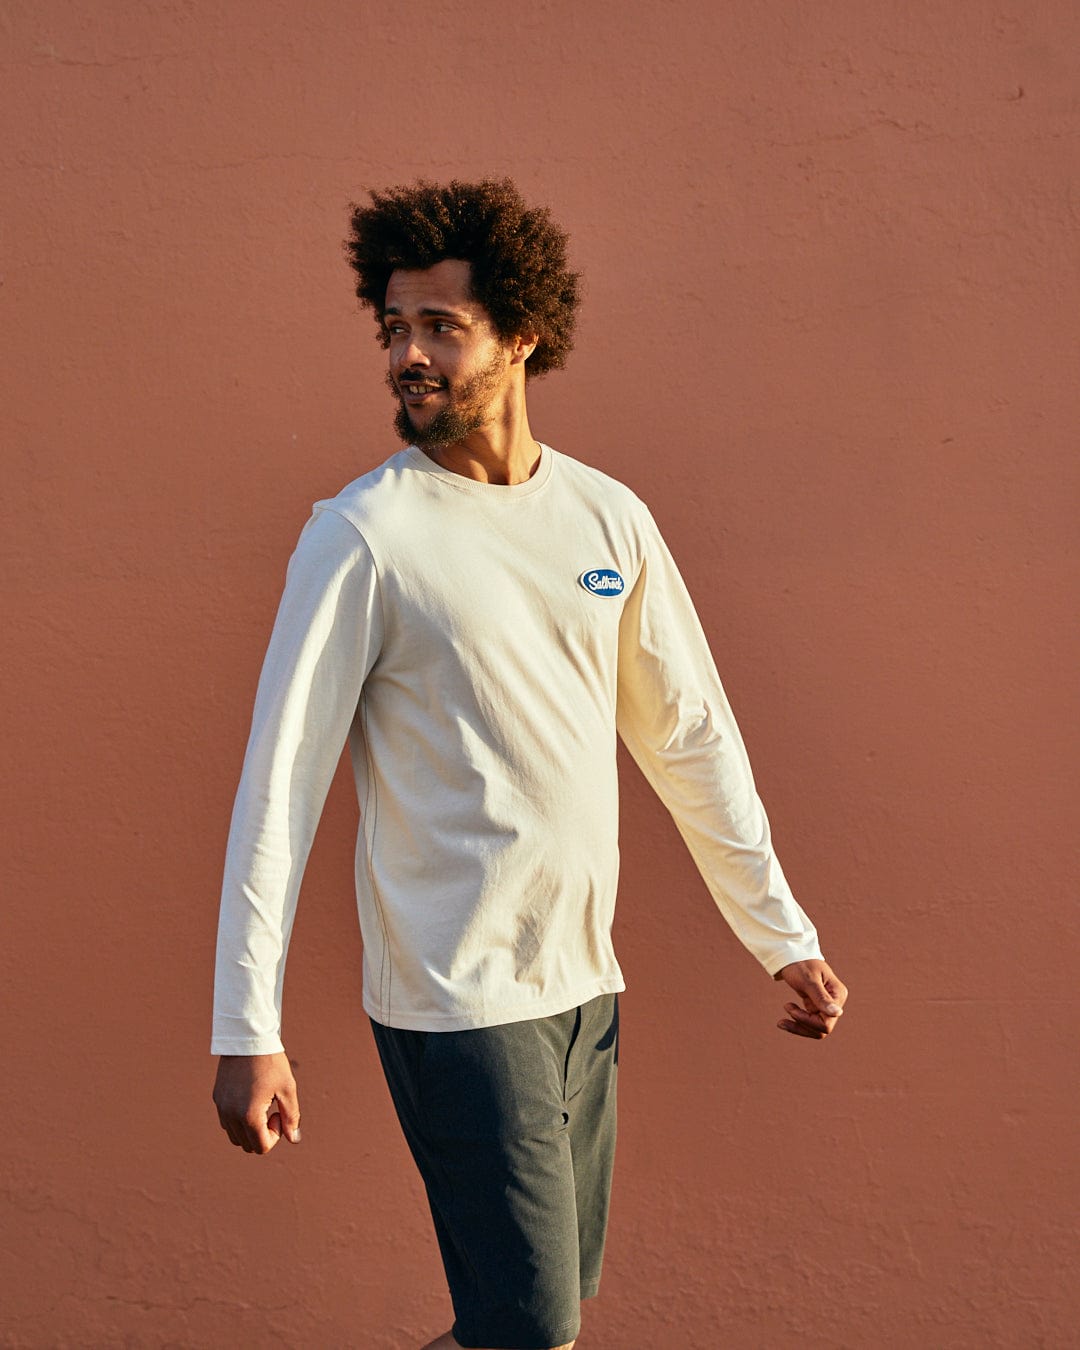 A man with an afro walking past a terracotta wall, wearing a white long-sleeve shirt with a blue Nylon Saltrock badge and dark pants, looking to the side wearing the Saltrock Attendant Mens Long Sleeve T-Shirt in Cream.